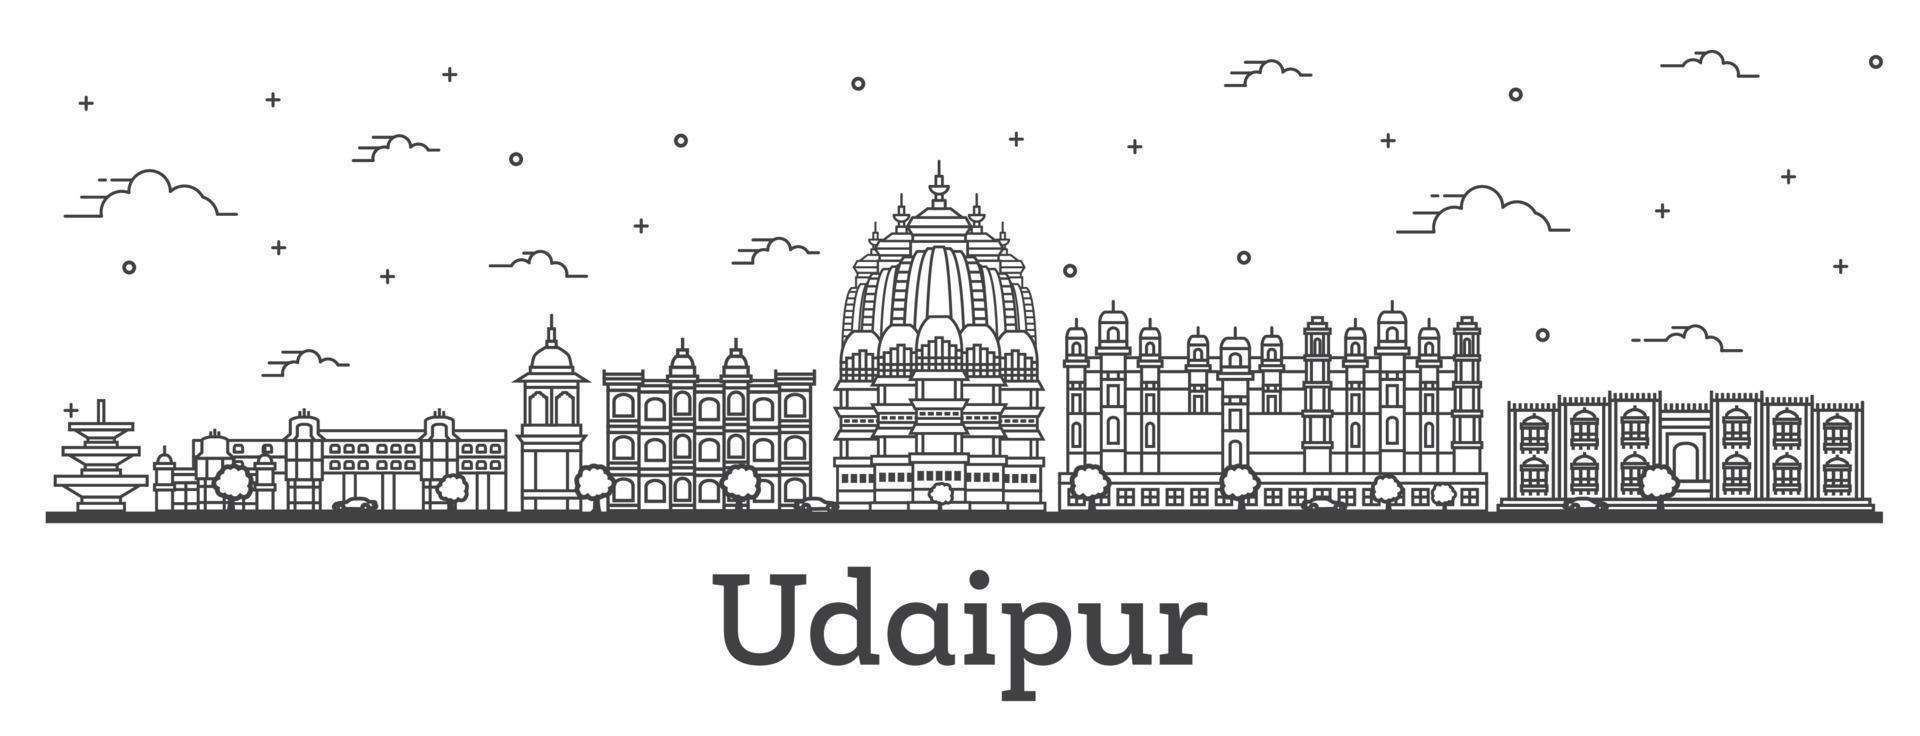 Outline Udaipur India City Skyline with Historical Buildings Isolated on White. vector